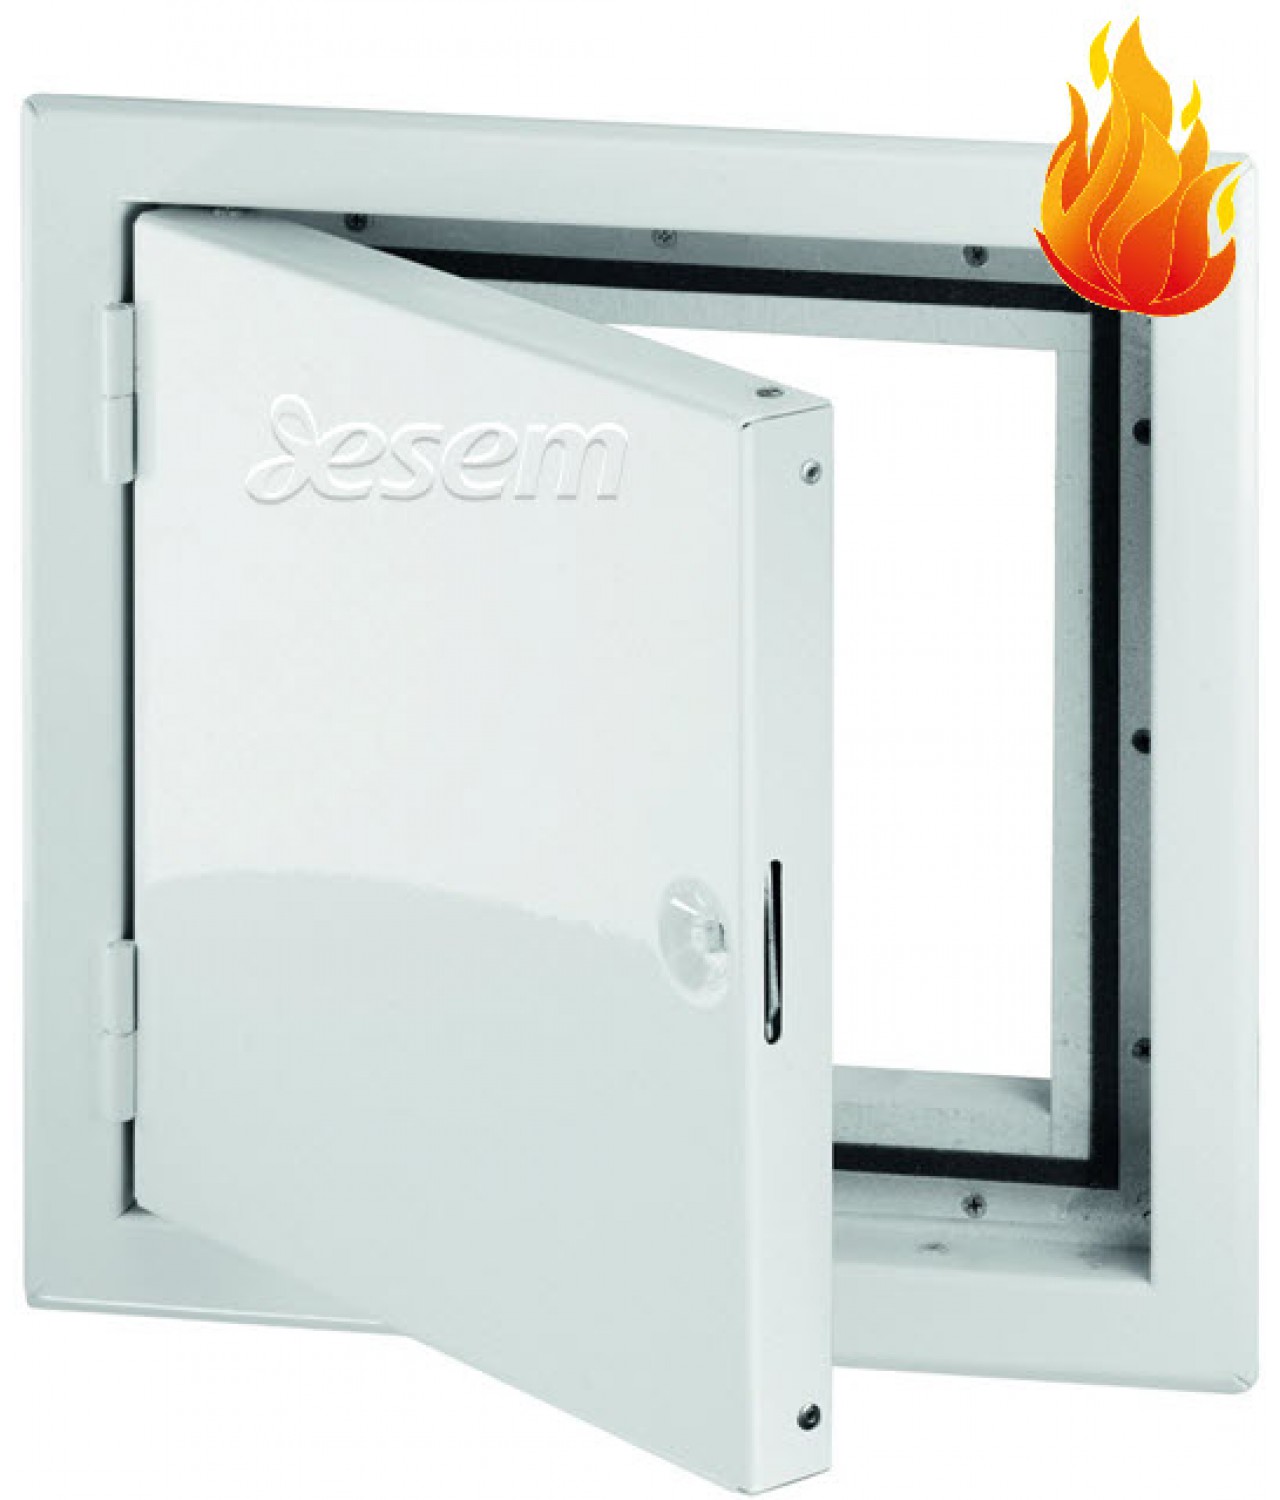 Fire rated access panels Fire Star SW SOLID EI90